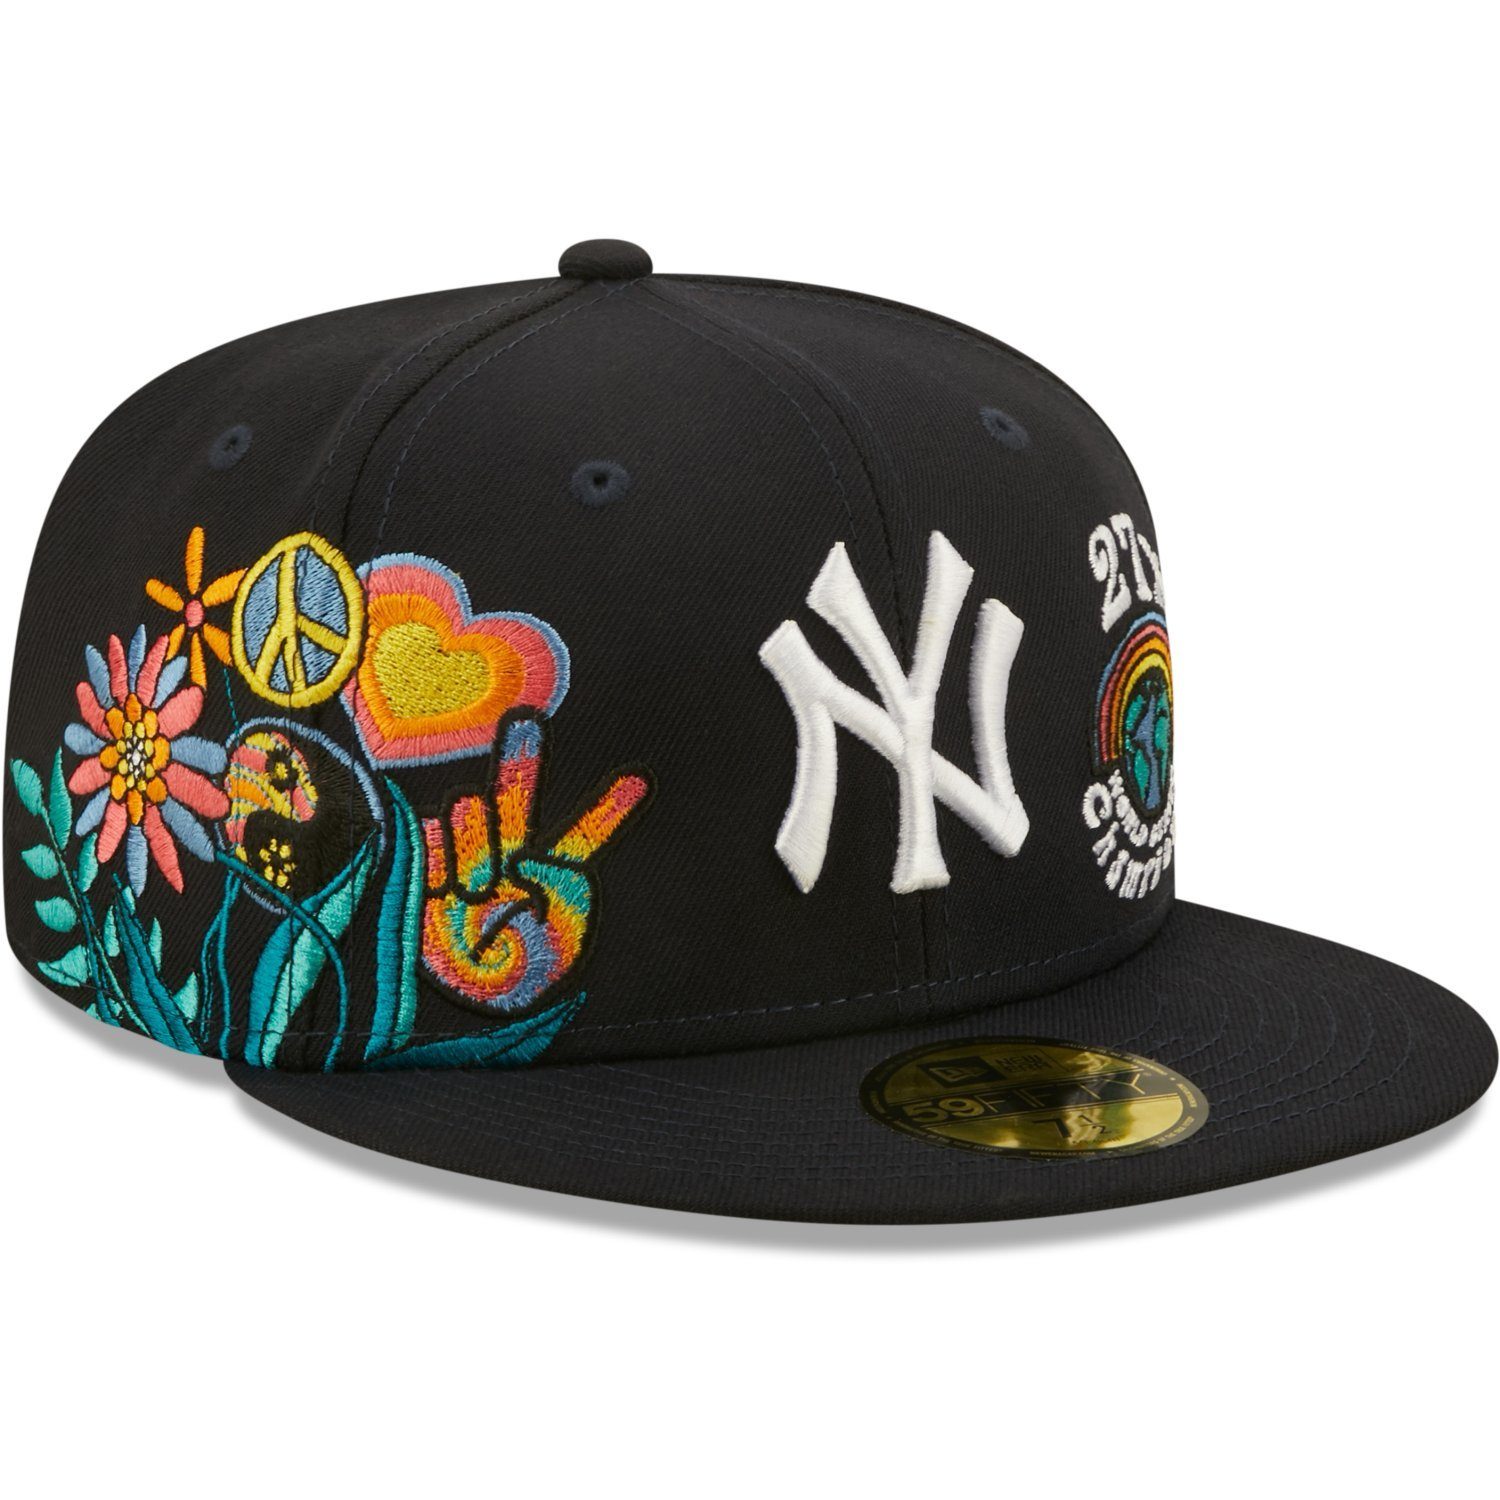 New Era Fitted Cap 59Fifty GROOVY New York Yankees | Fitted Caps